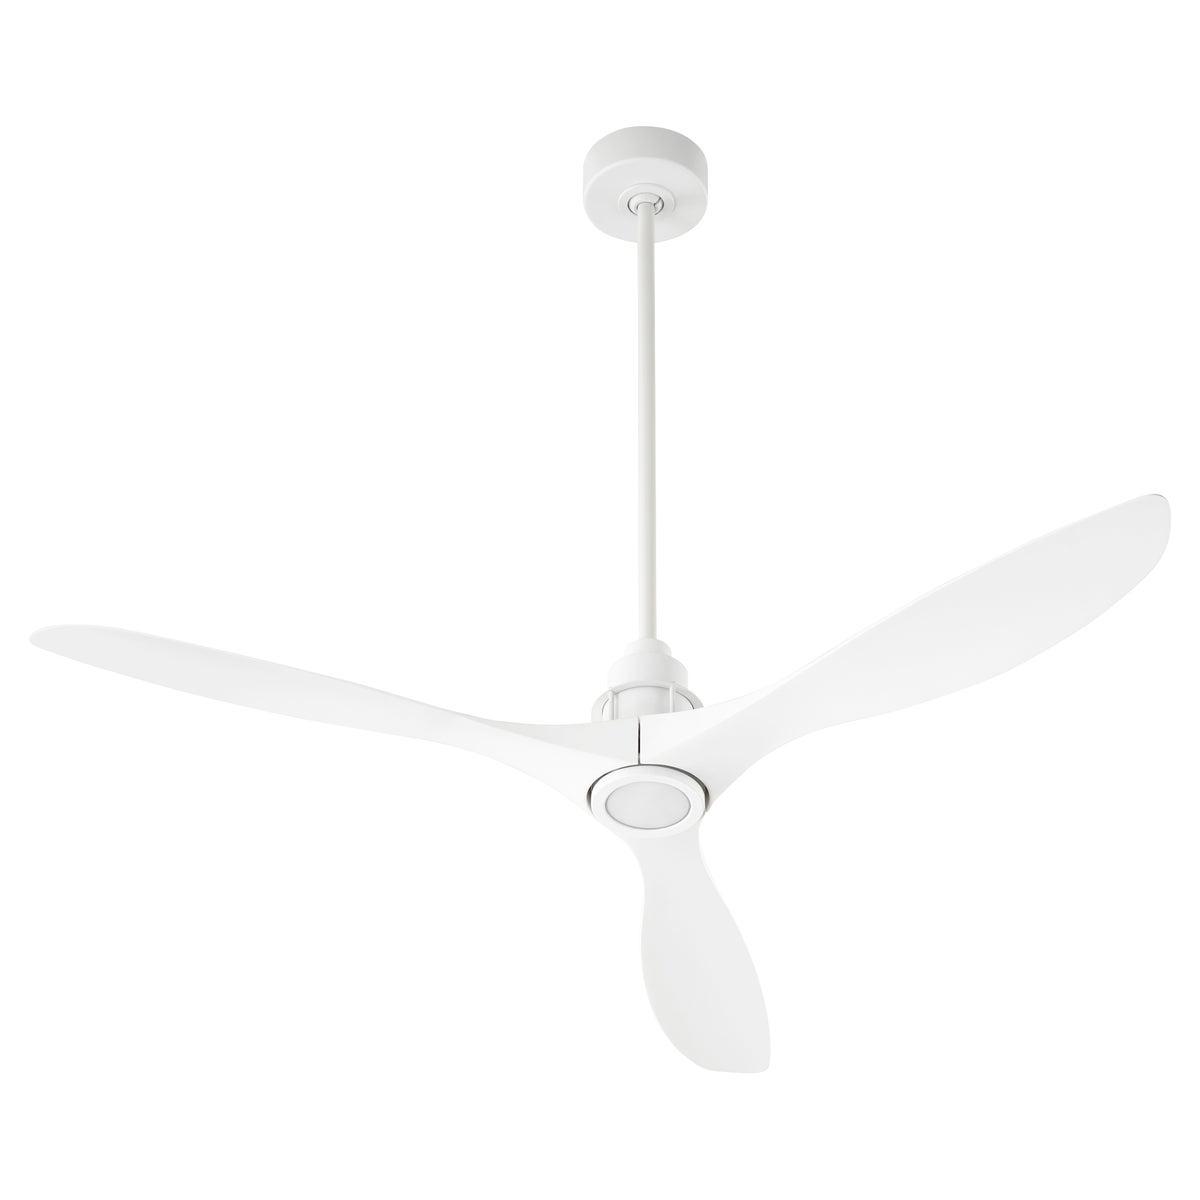 A sleek, modern ceiling fan with a light, featuring a chrome stained housing and three monochromatic blades. Provides powerful and long-lasting air circulation in any interior space.